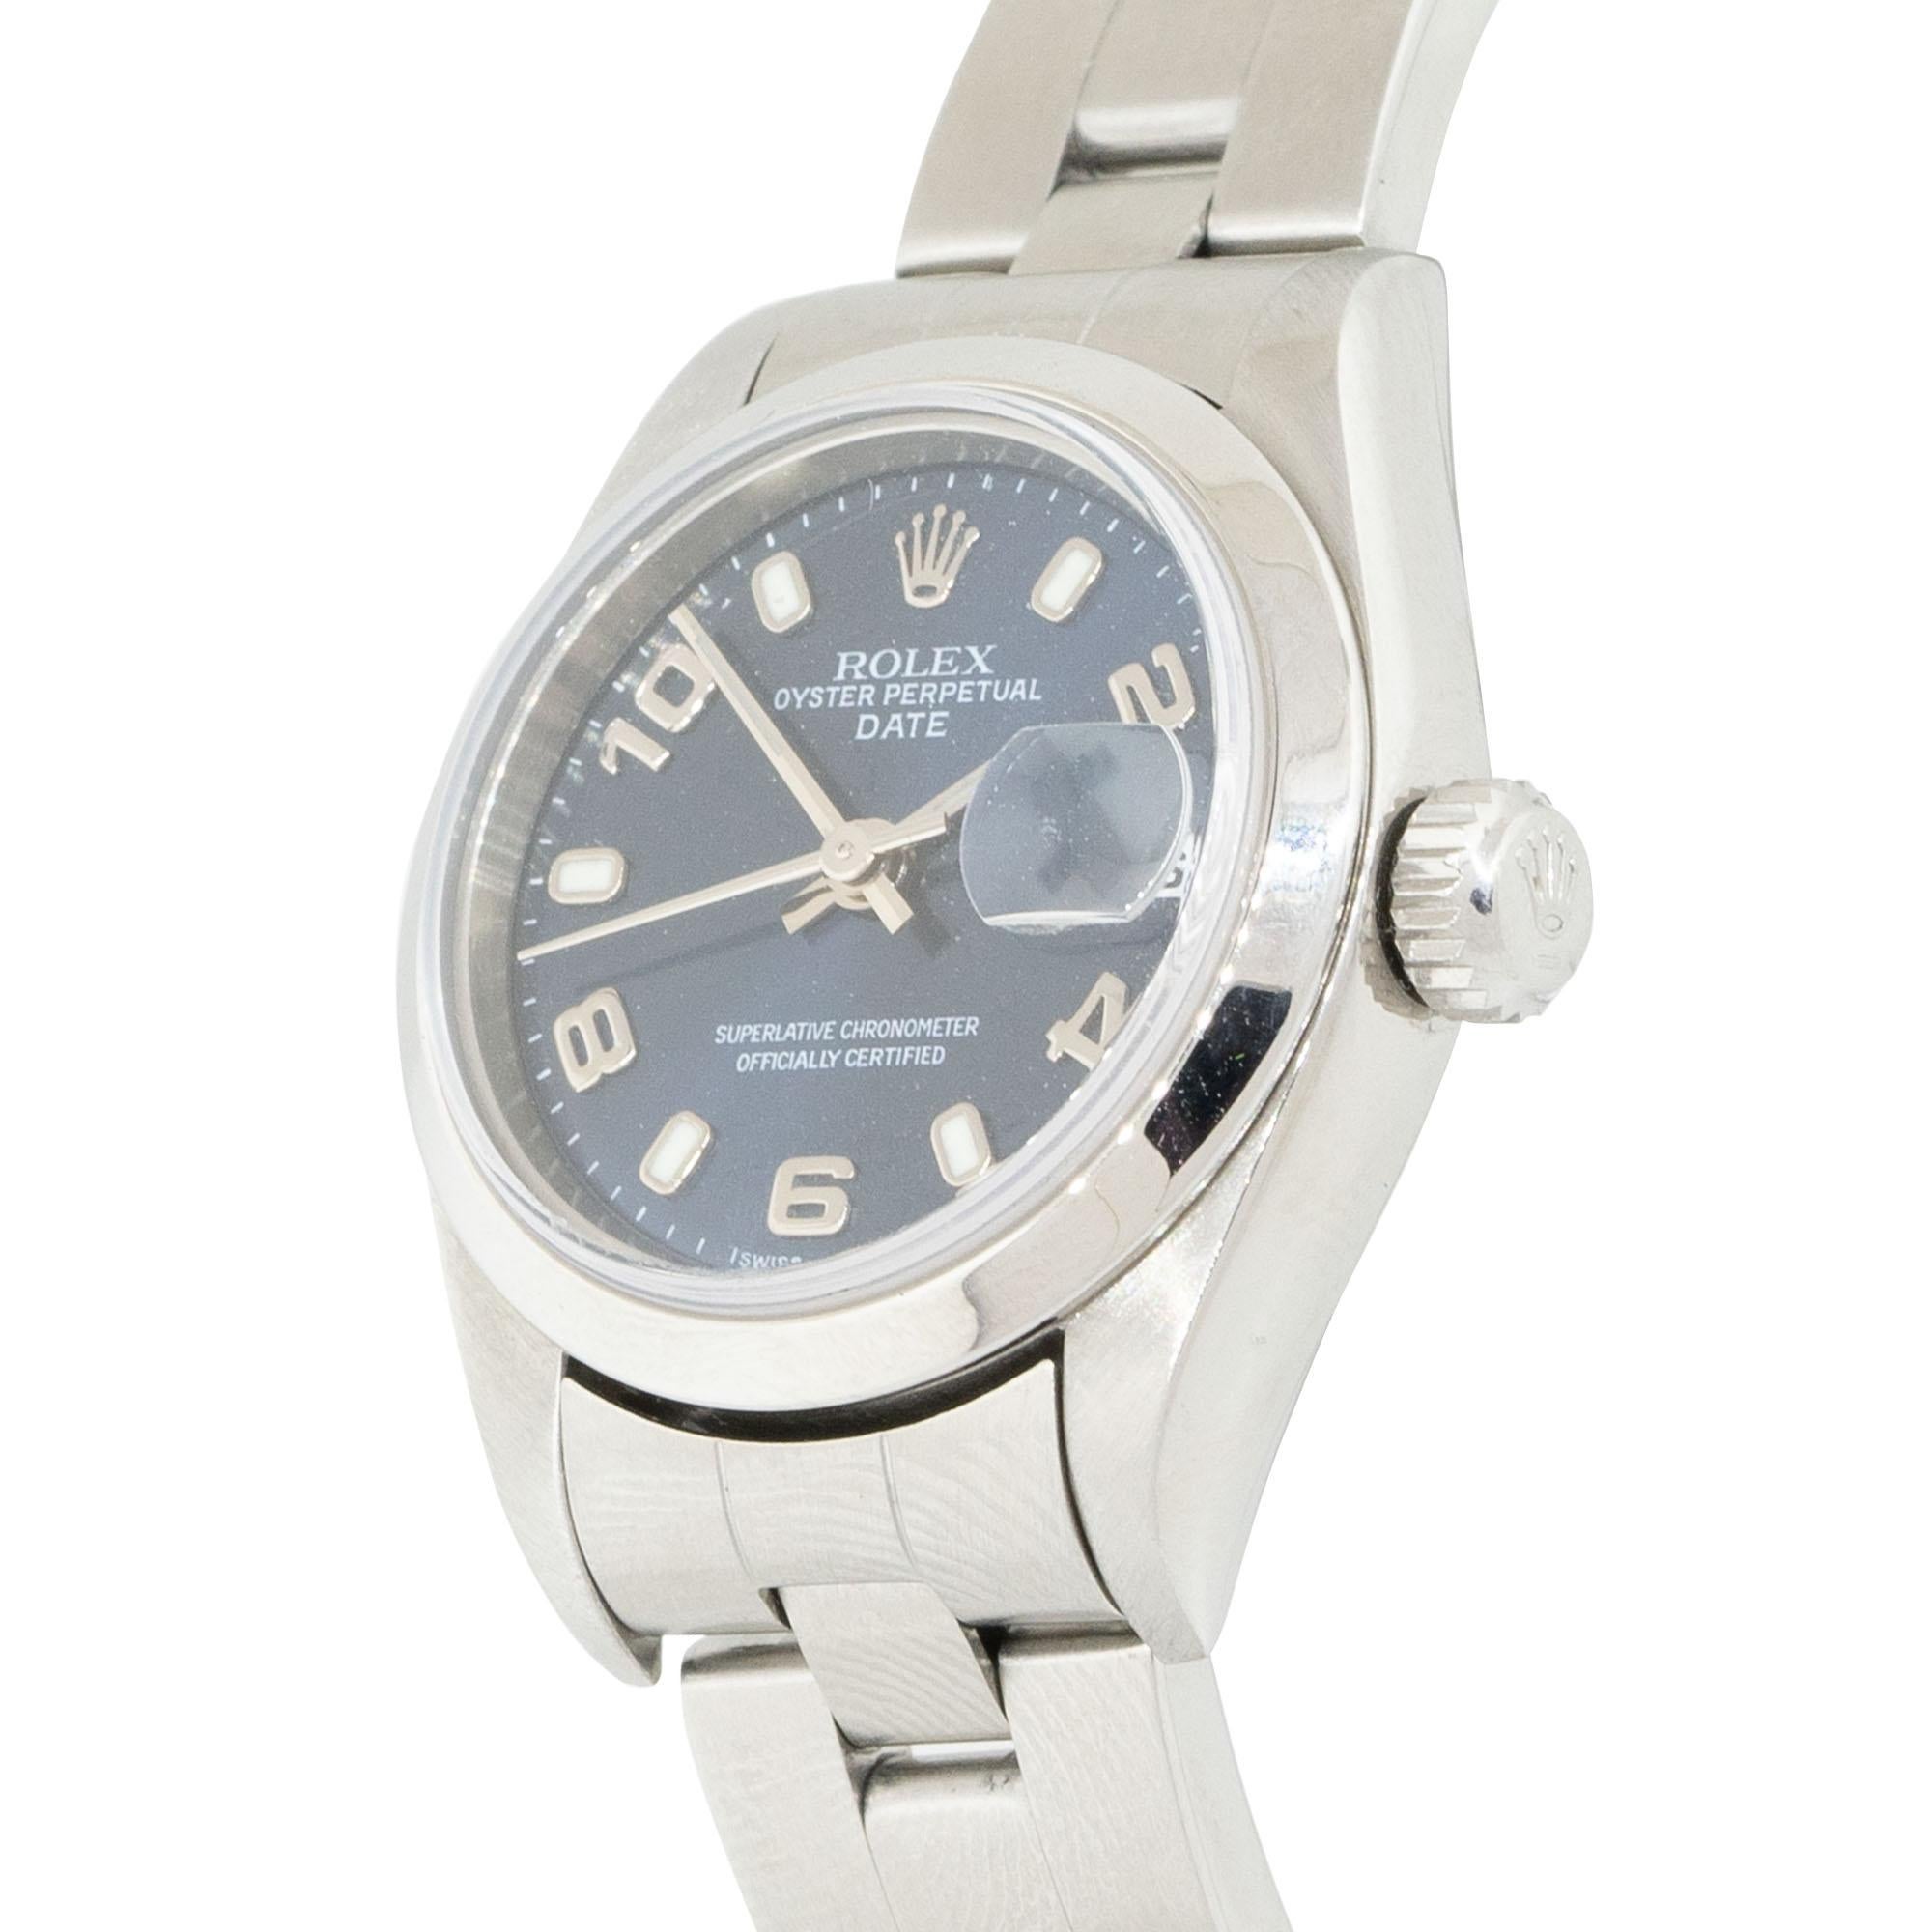 Rolex 176200 Datejust Stainless Steel Black Semi Arabic Dial Watch In Excellent Condition For Sale In Boca Raton, FL